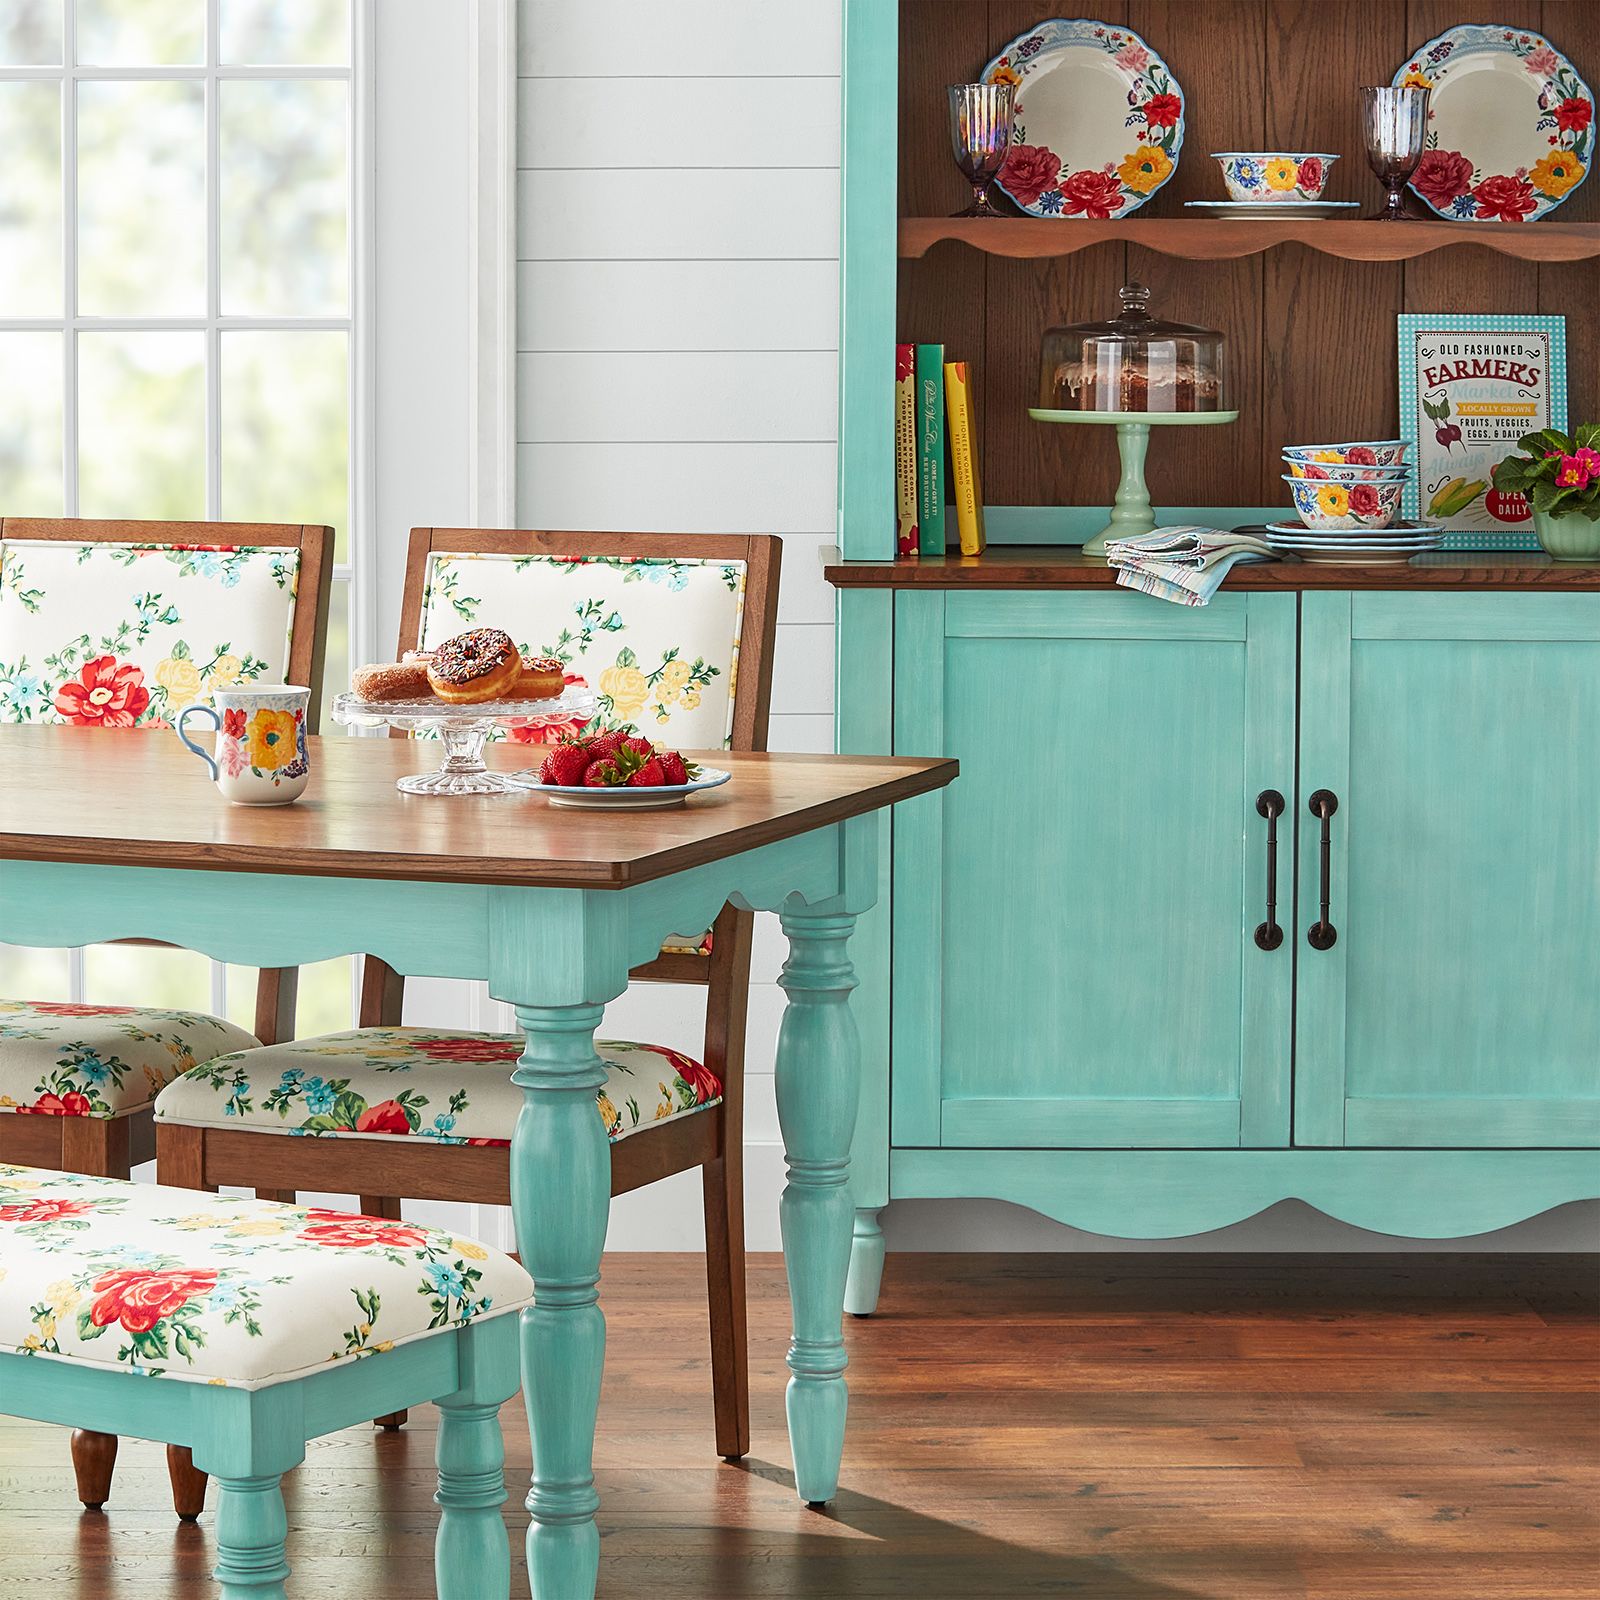 https://hips.hearstapps.com/hmg-prod/images/the-pioneer-woman-dining-furniture-648b87a21d168.jpg